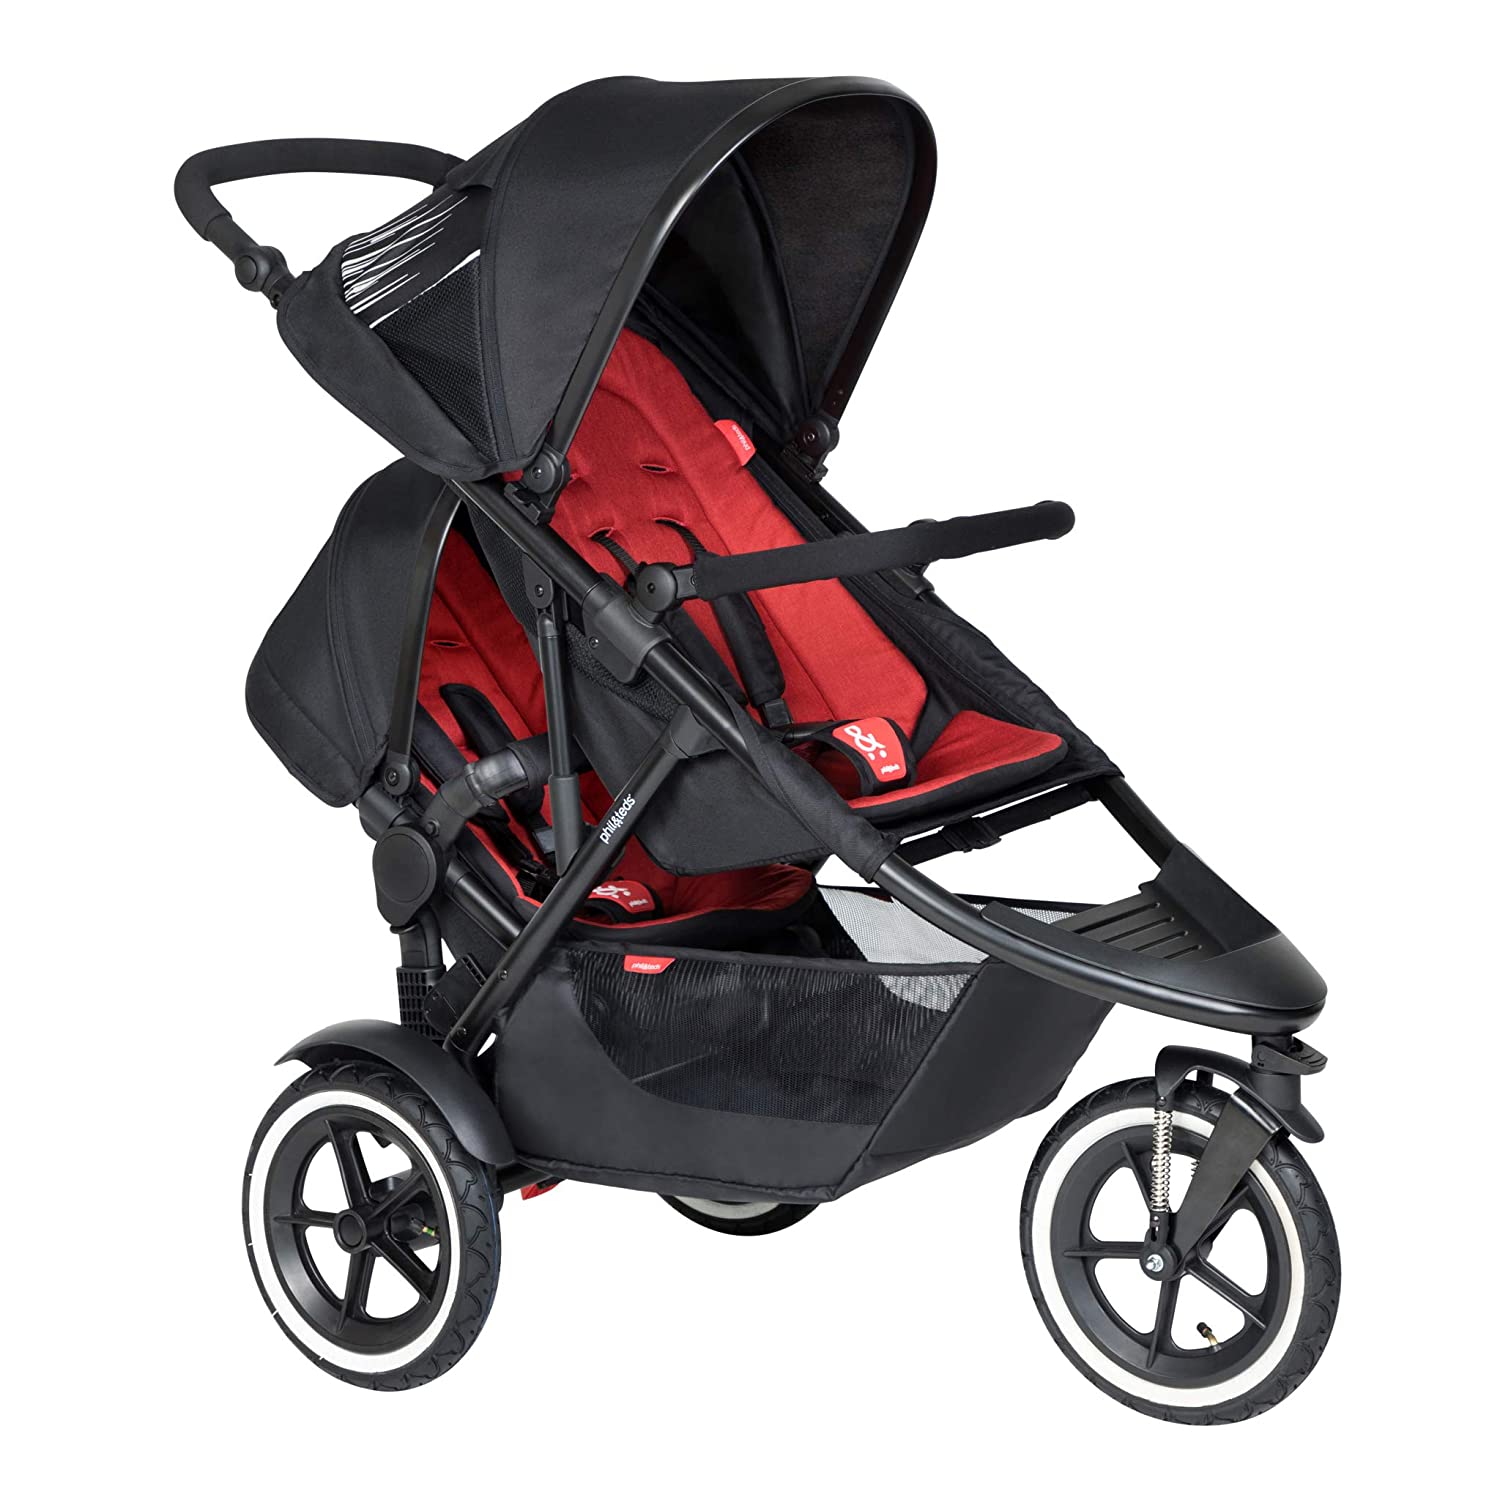 Skinnende Aftensmad Stedord Phil & Ted's Inline Double Strollers are sporty, compact and versatile.